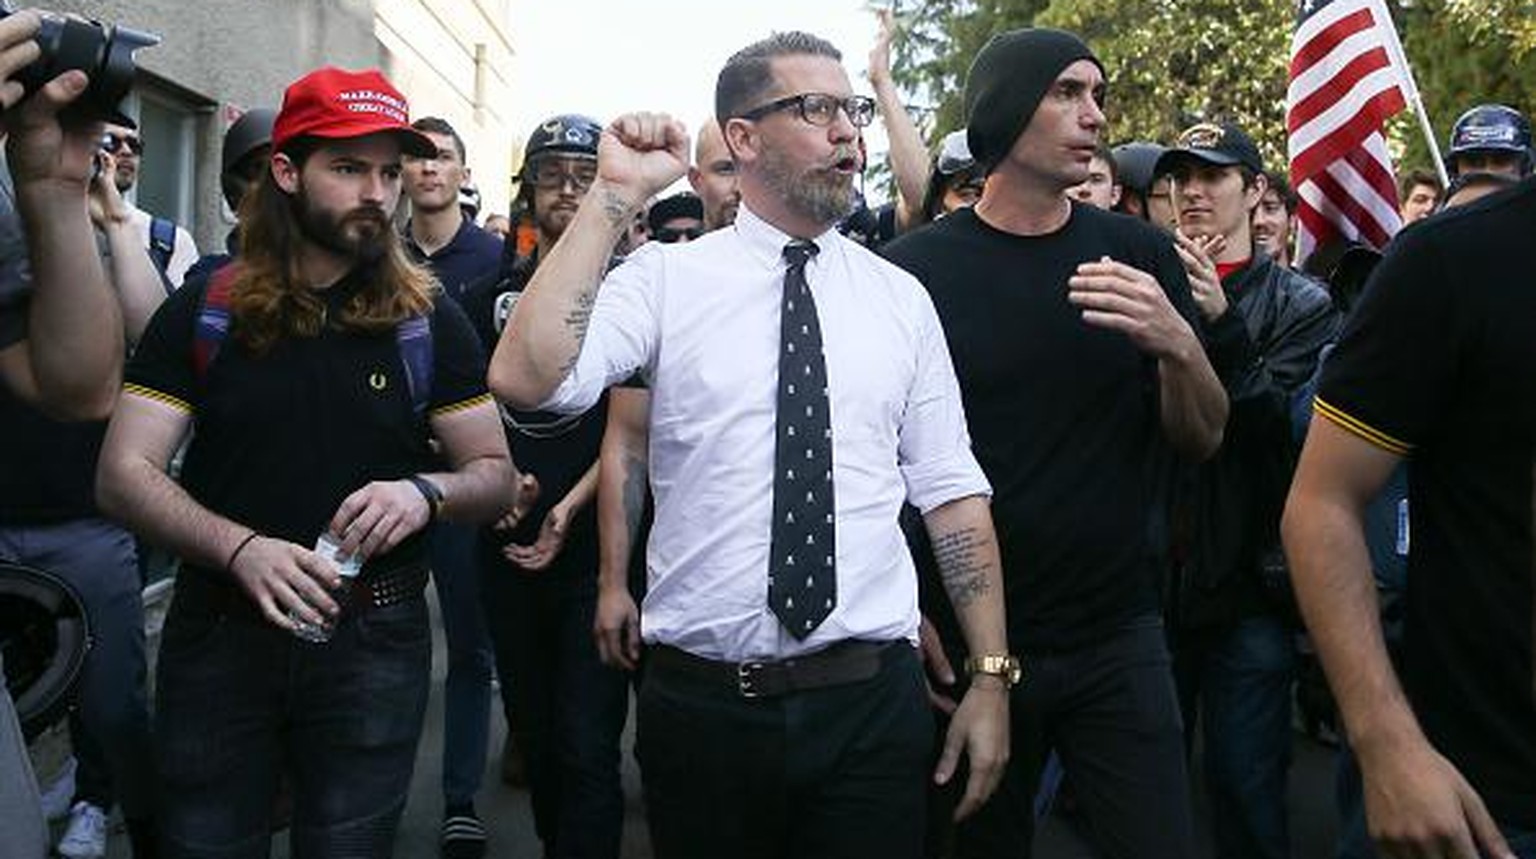 BERKELEY, CA - APRIL 27: Right wing provocateur and Vice co-founder Gavin McInnes (C) pumps his fist during a rally at Martin Luther King Jr. Civic Center Park on April 27, 2017 in Berkeley, Californi ...